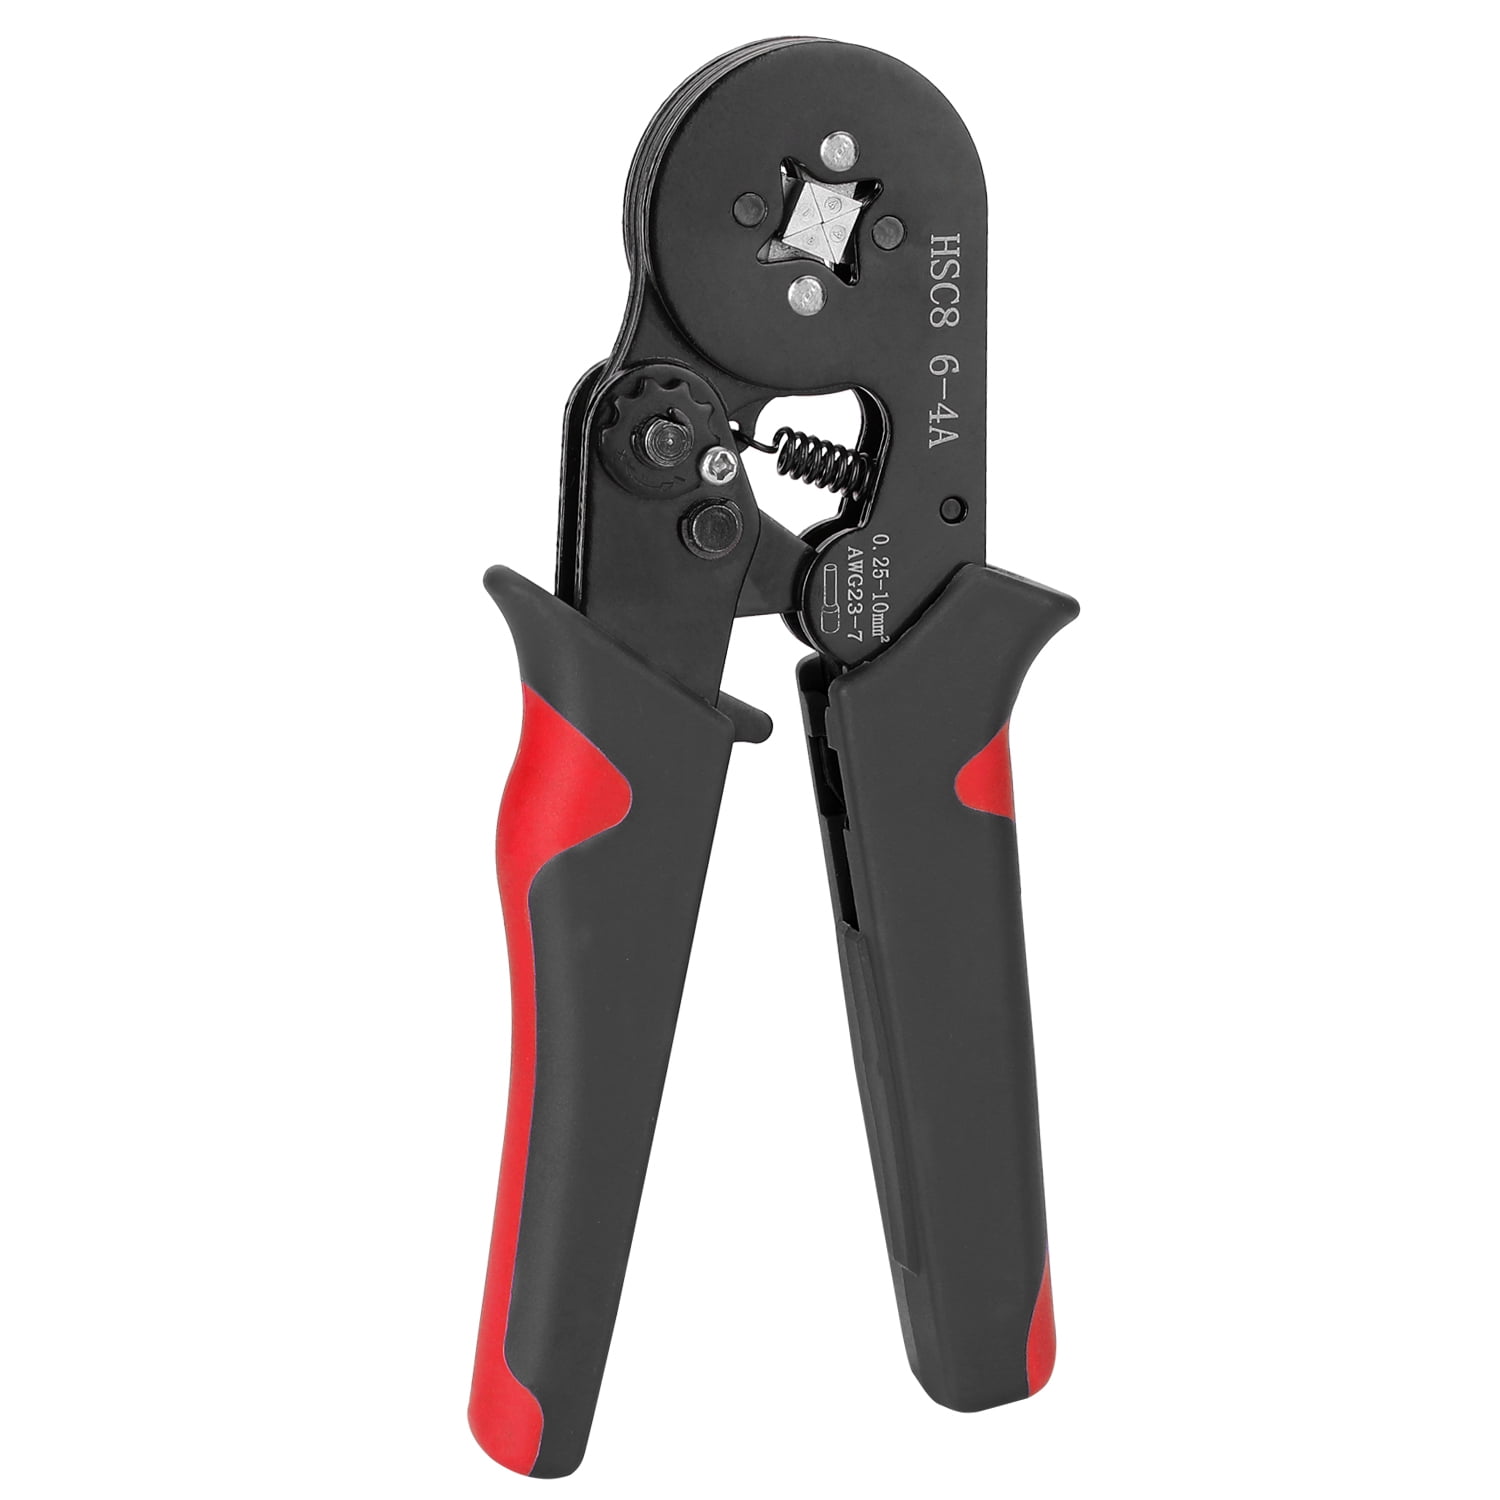 Details about   Insulated Cable Crimper Tool Kit Wire Terminal Ratchet Plier Crimping with 5 Die 